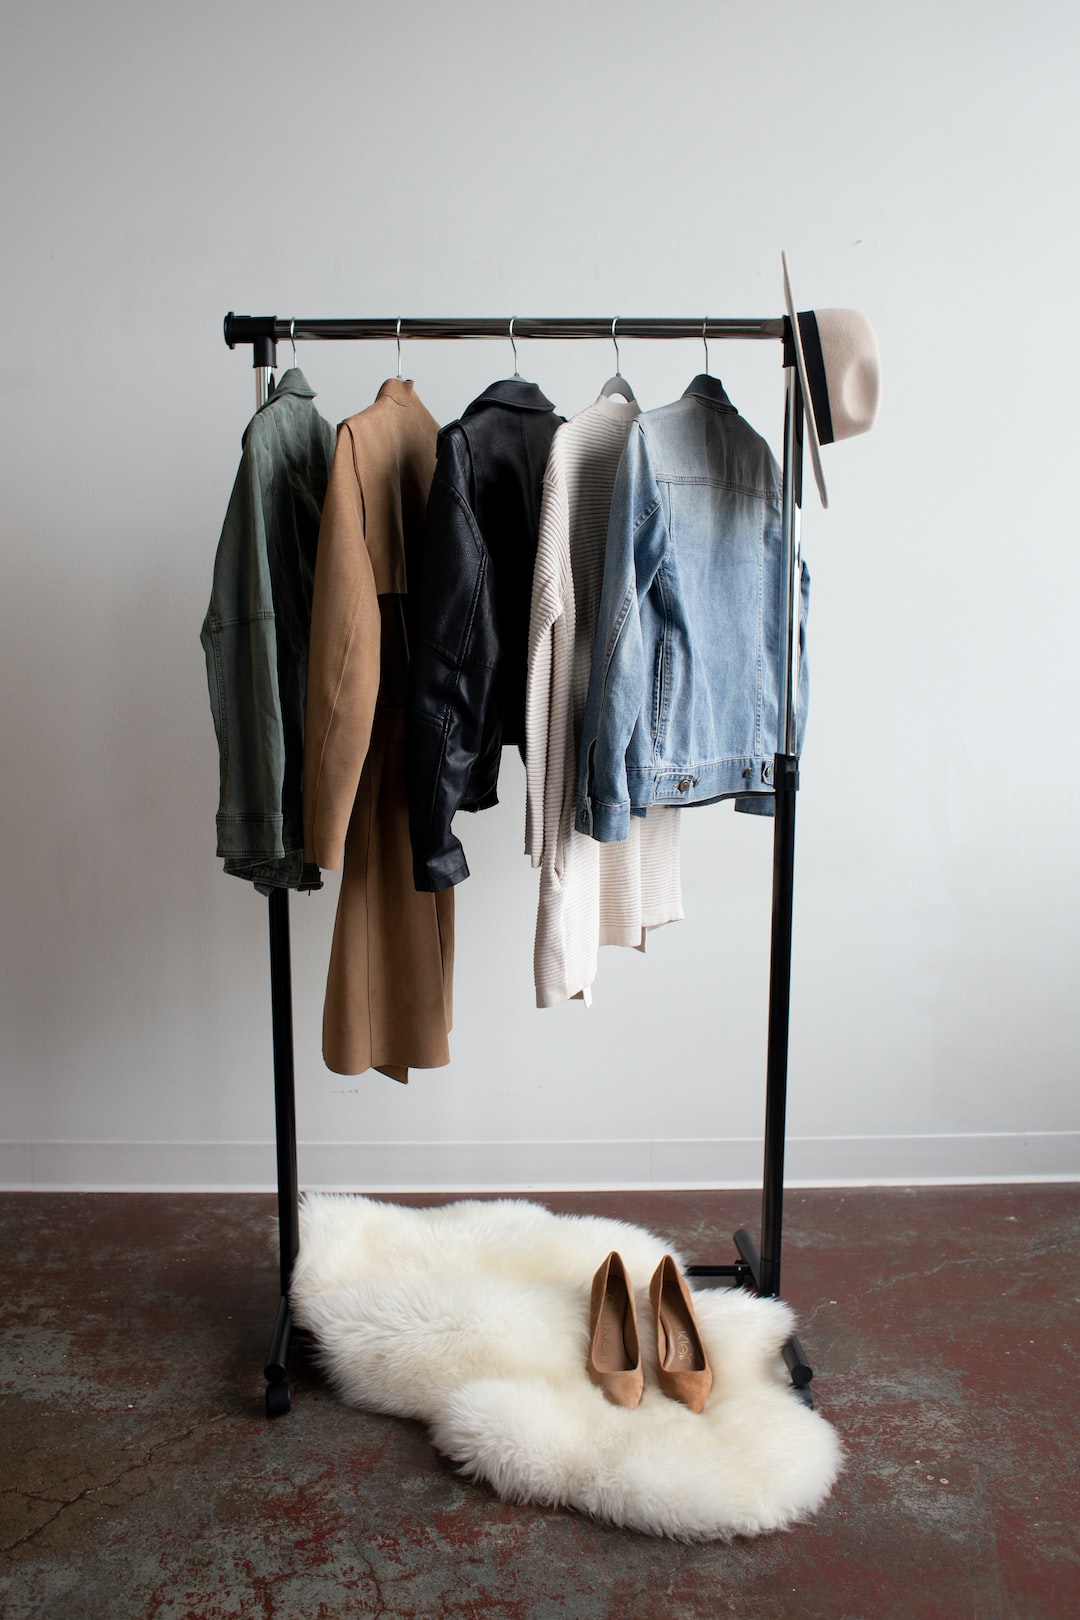 Creating a Capsule Wardrobe: Simplify Your Style